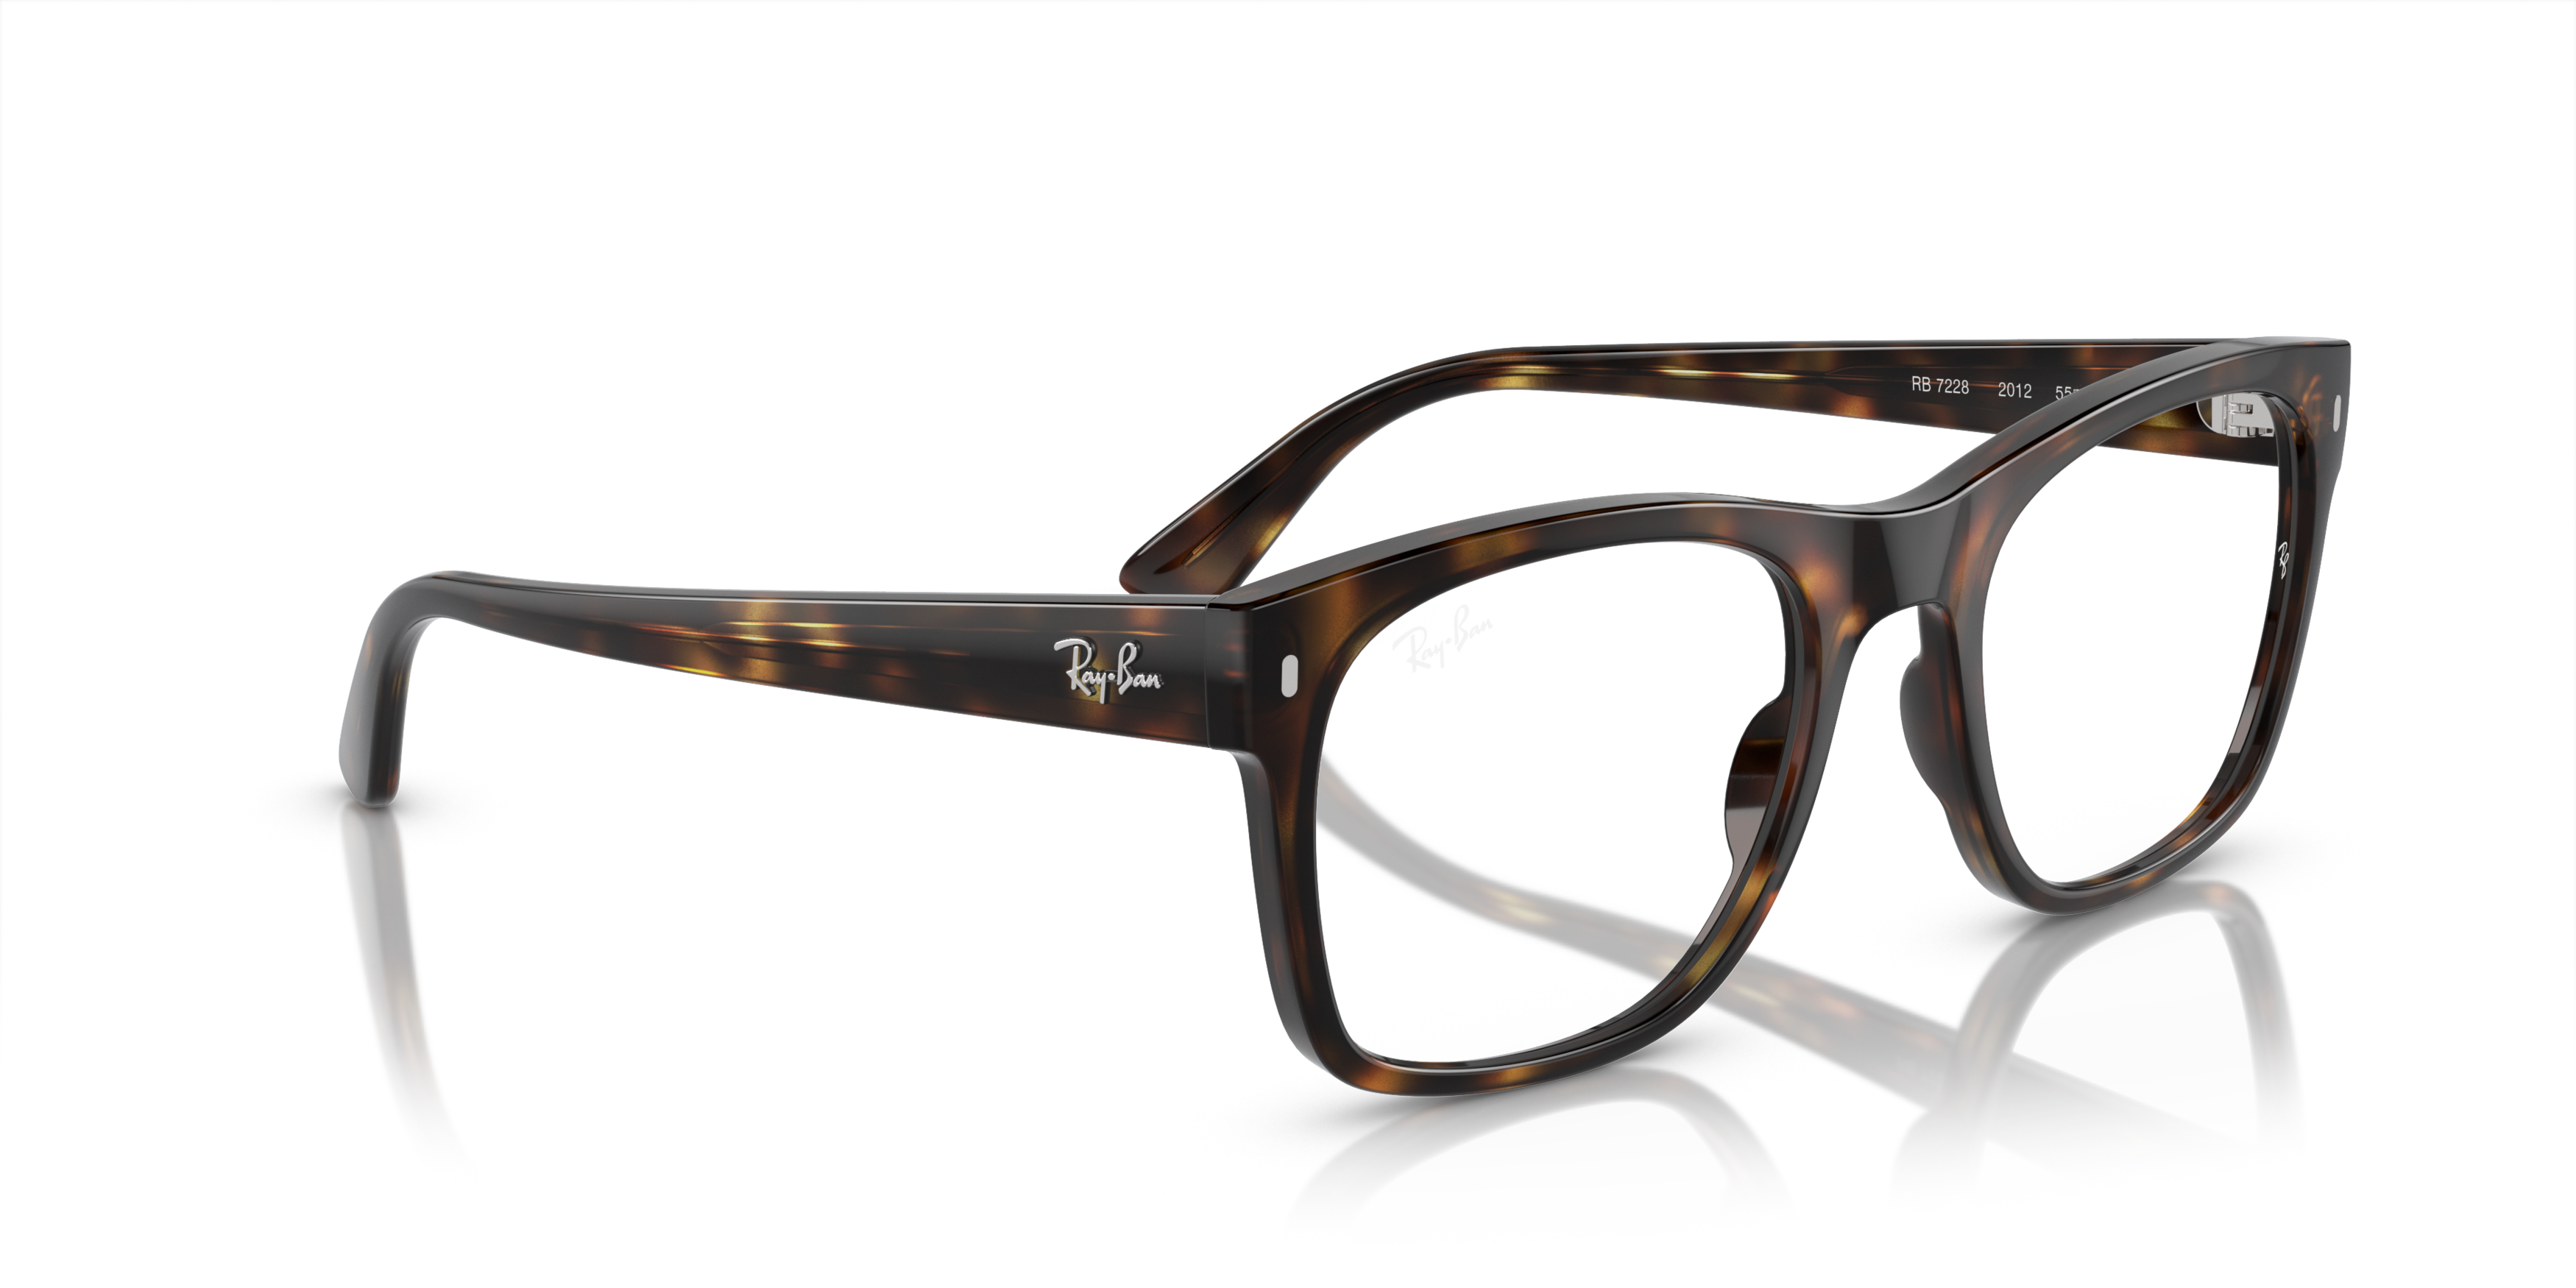 Angle_Right01 Ray-Ban RX 7228 Glasses Transparent / Tortoise Shell